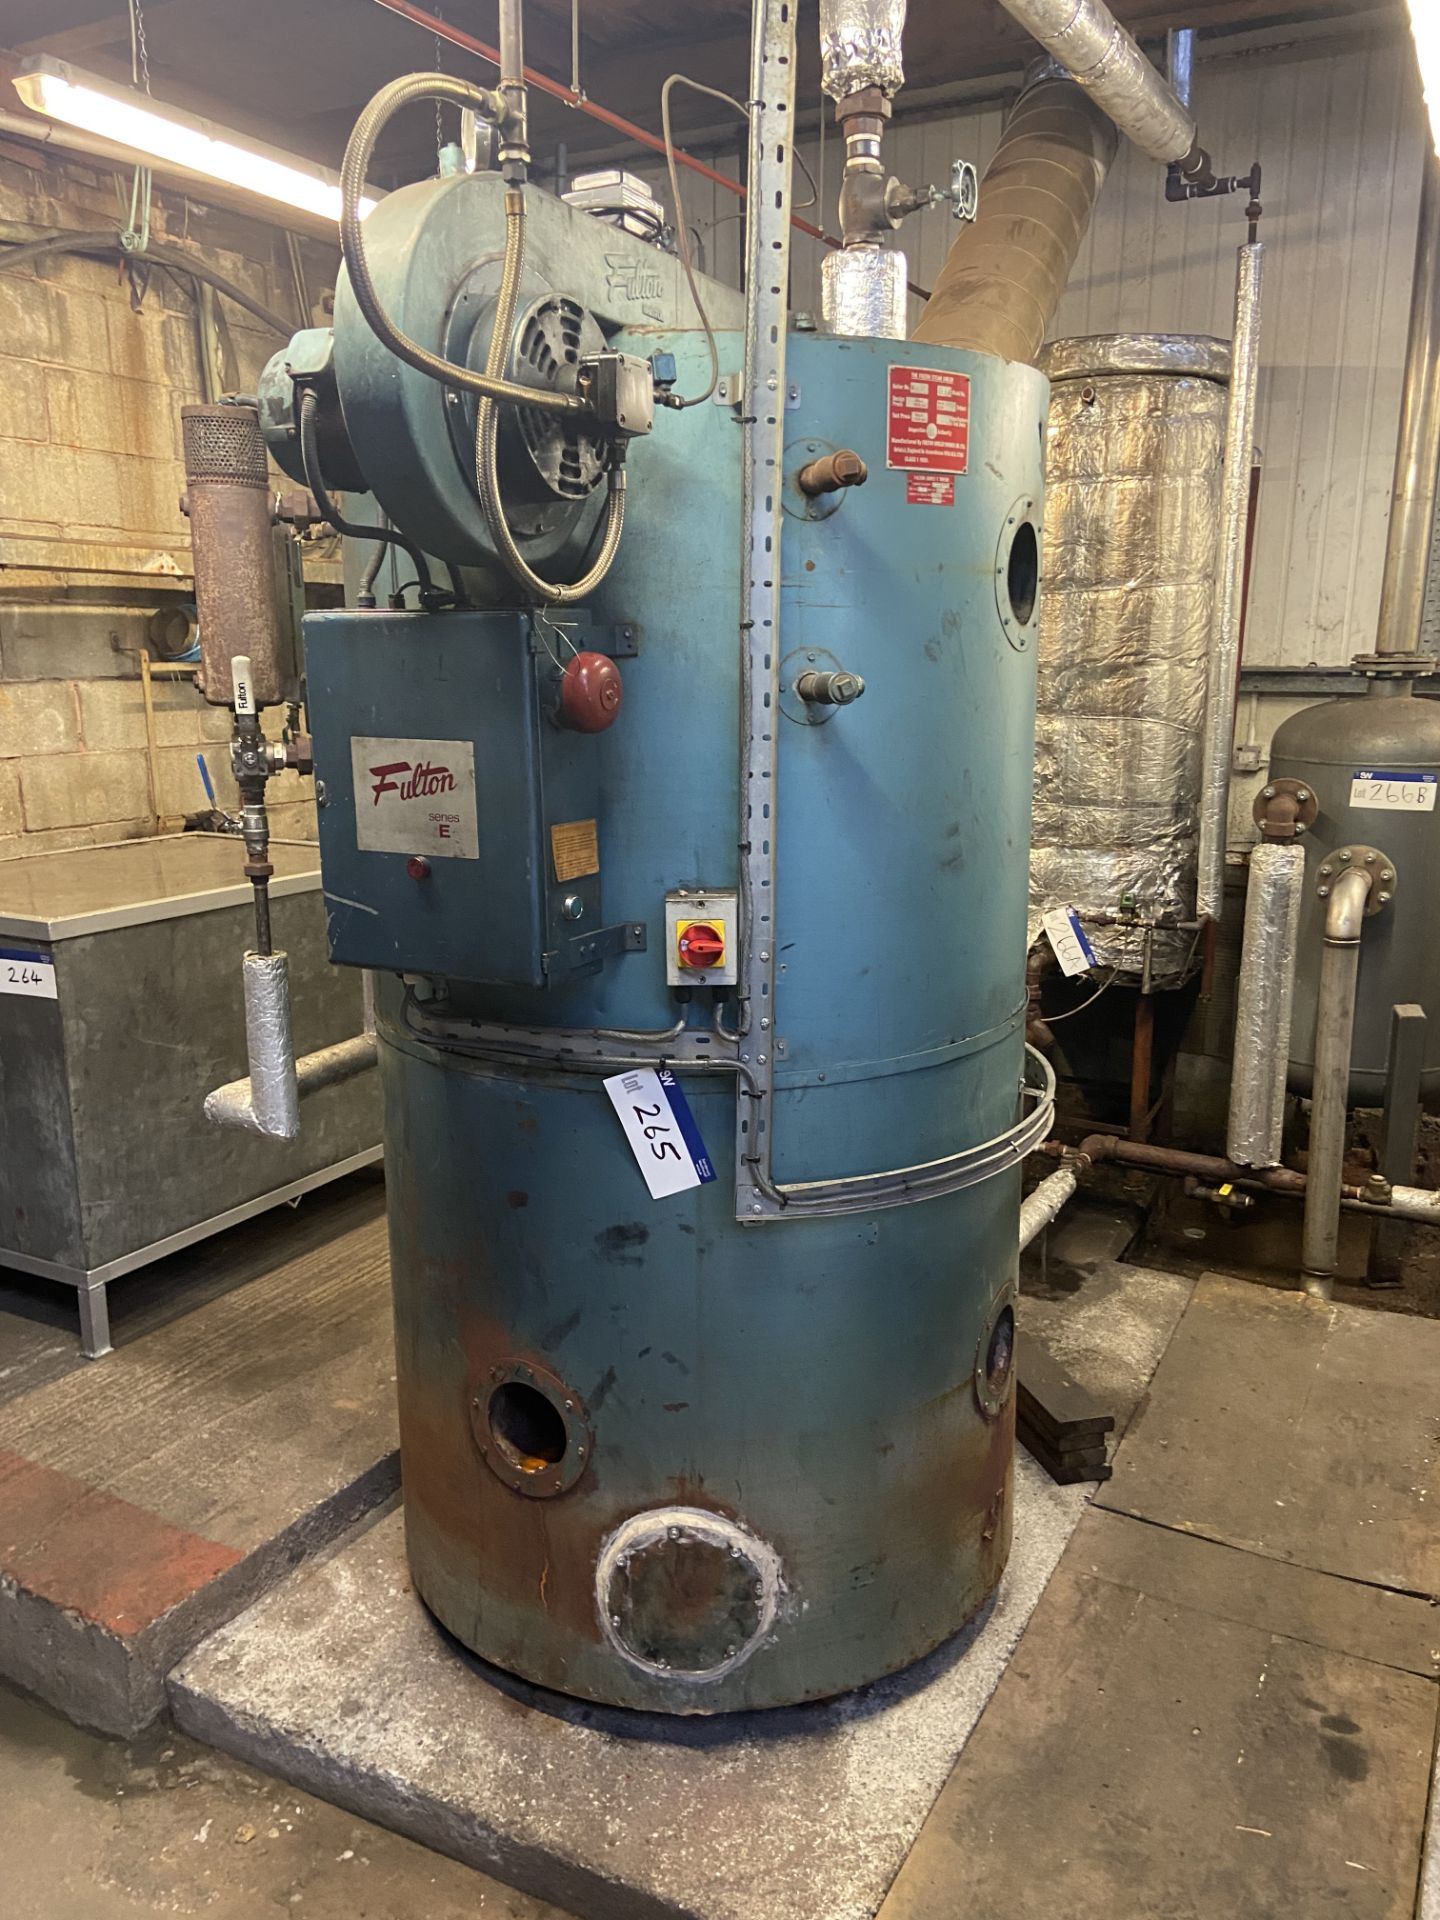 Fulton 30E VERTICAL OIL FIRED BOILER, boiler no. B6375, manufacture and test date 1991, 10,500